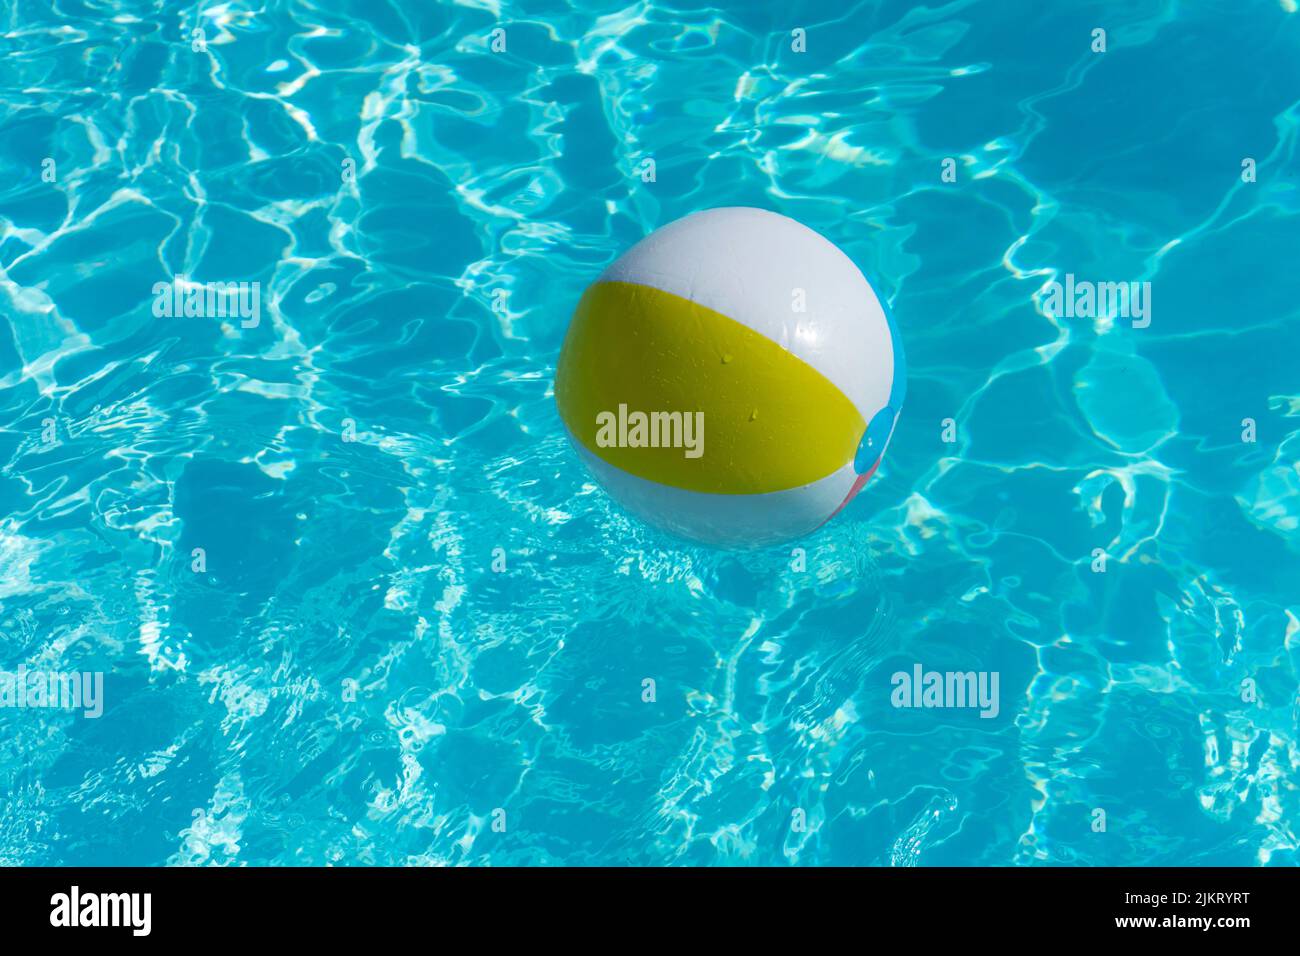 Inflatable beach ball floating on a summer swimming pool Stock Photo